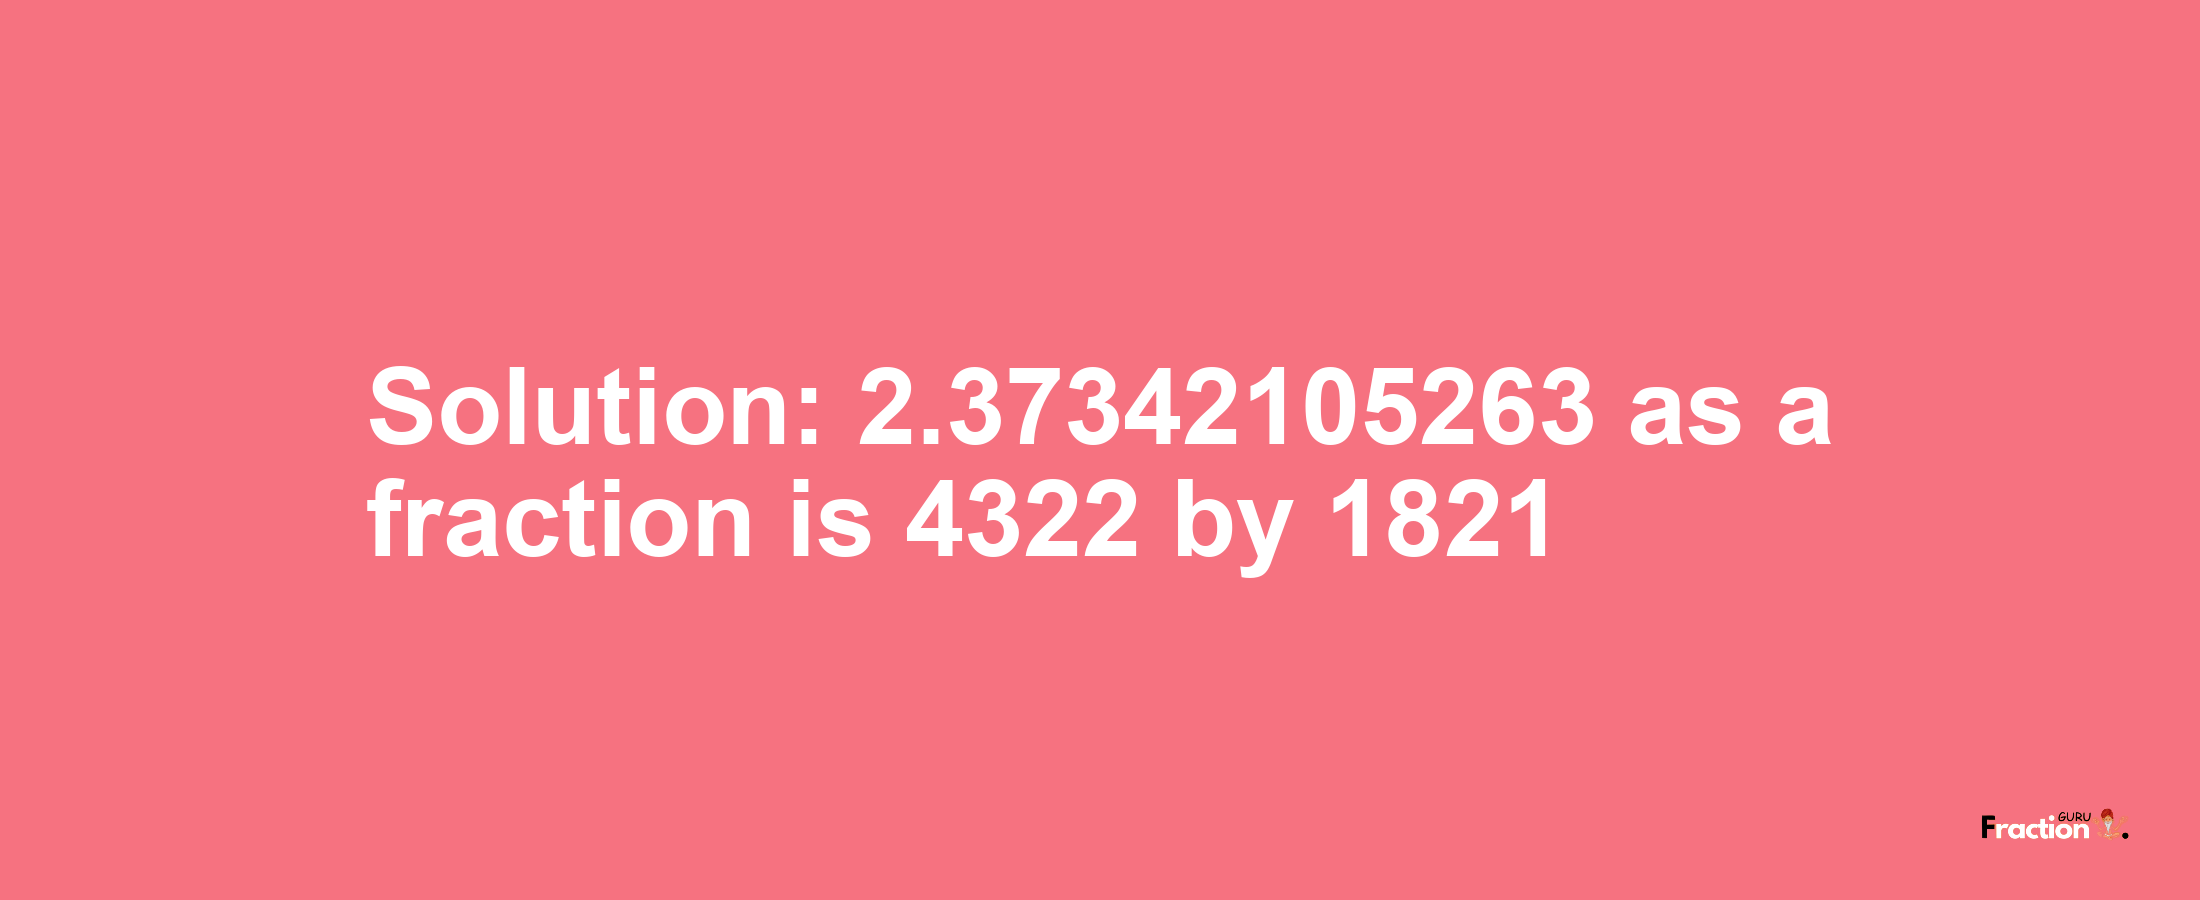 Solution:2.37342105263 as a fraction is 4322/1821